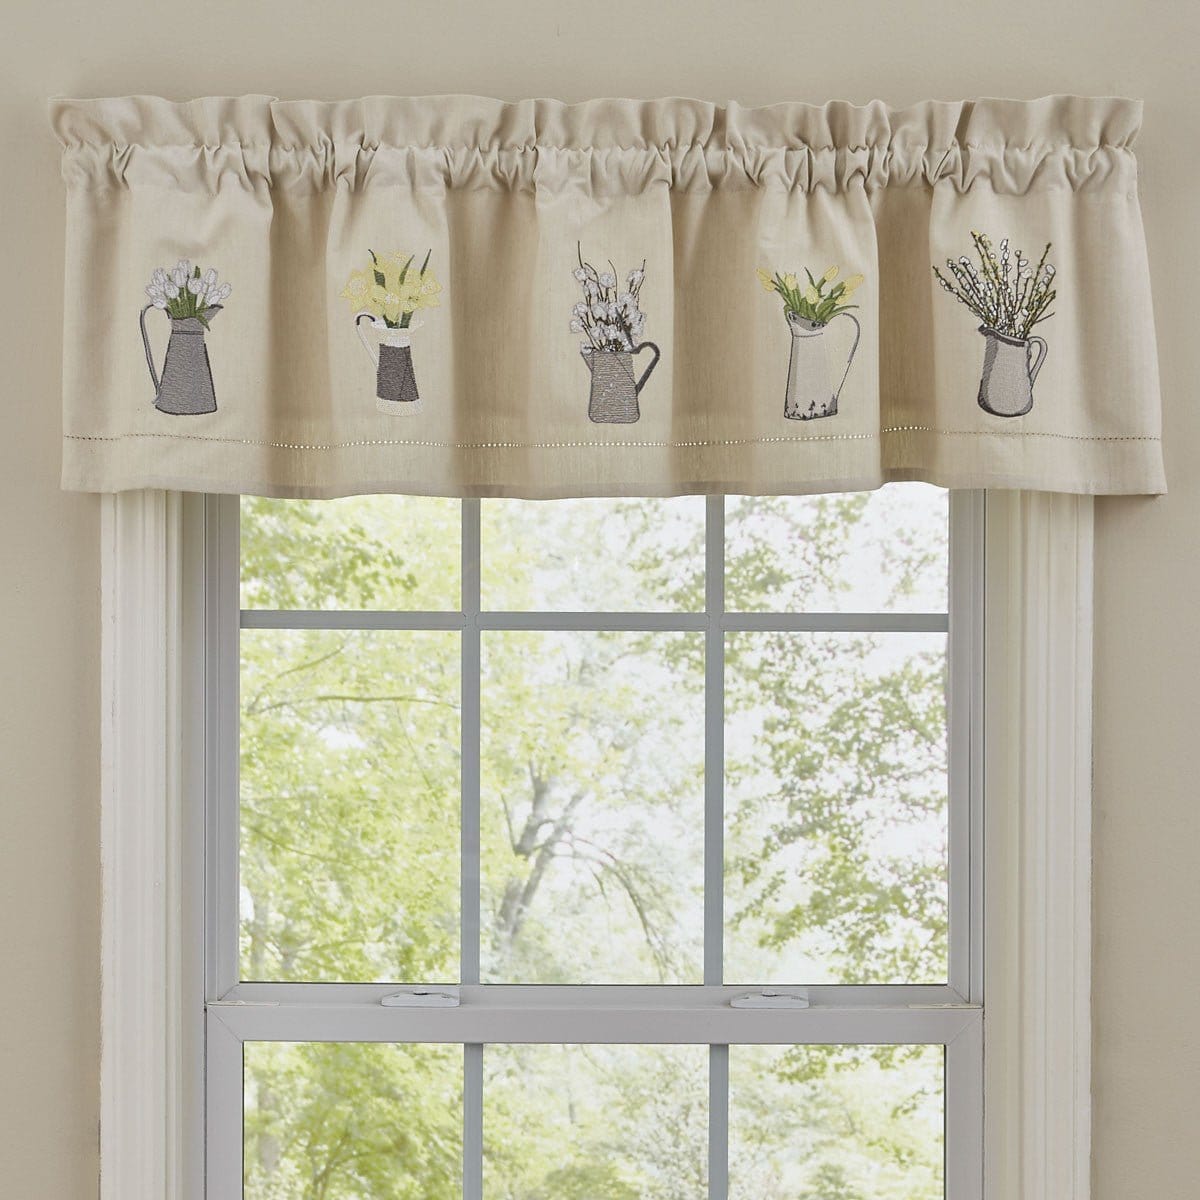 Embroidered pitcher with flowers Valance 14" High Lined-Park Designs-The Village Merchant